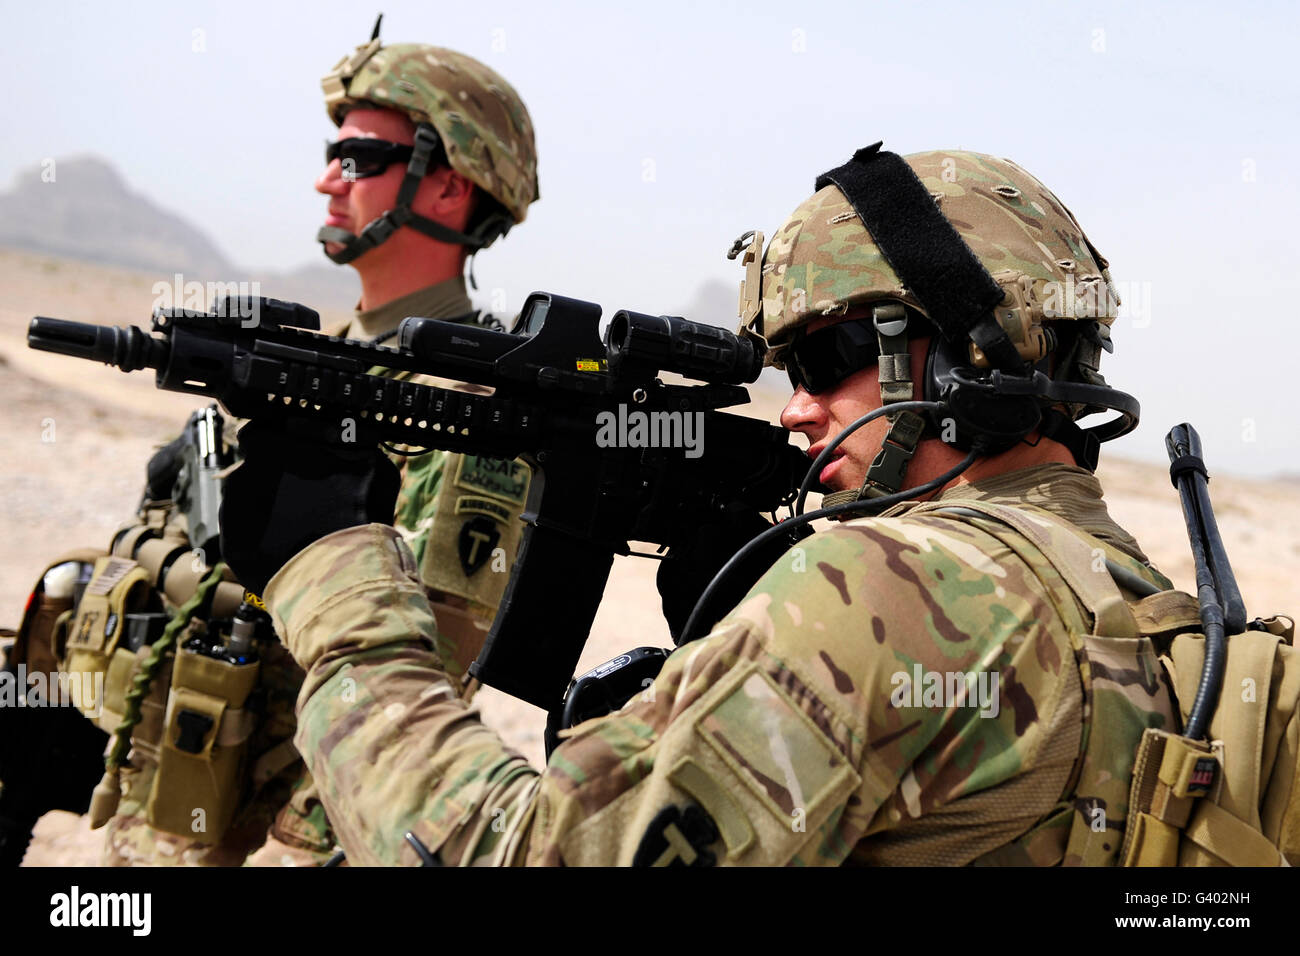 U.S. Army National Guards pull security in Afghanistan. Stock Photo